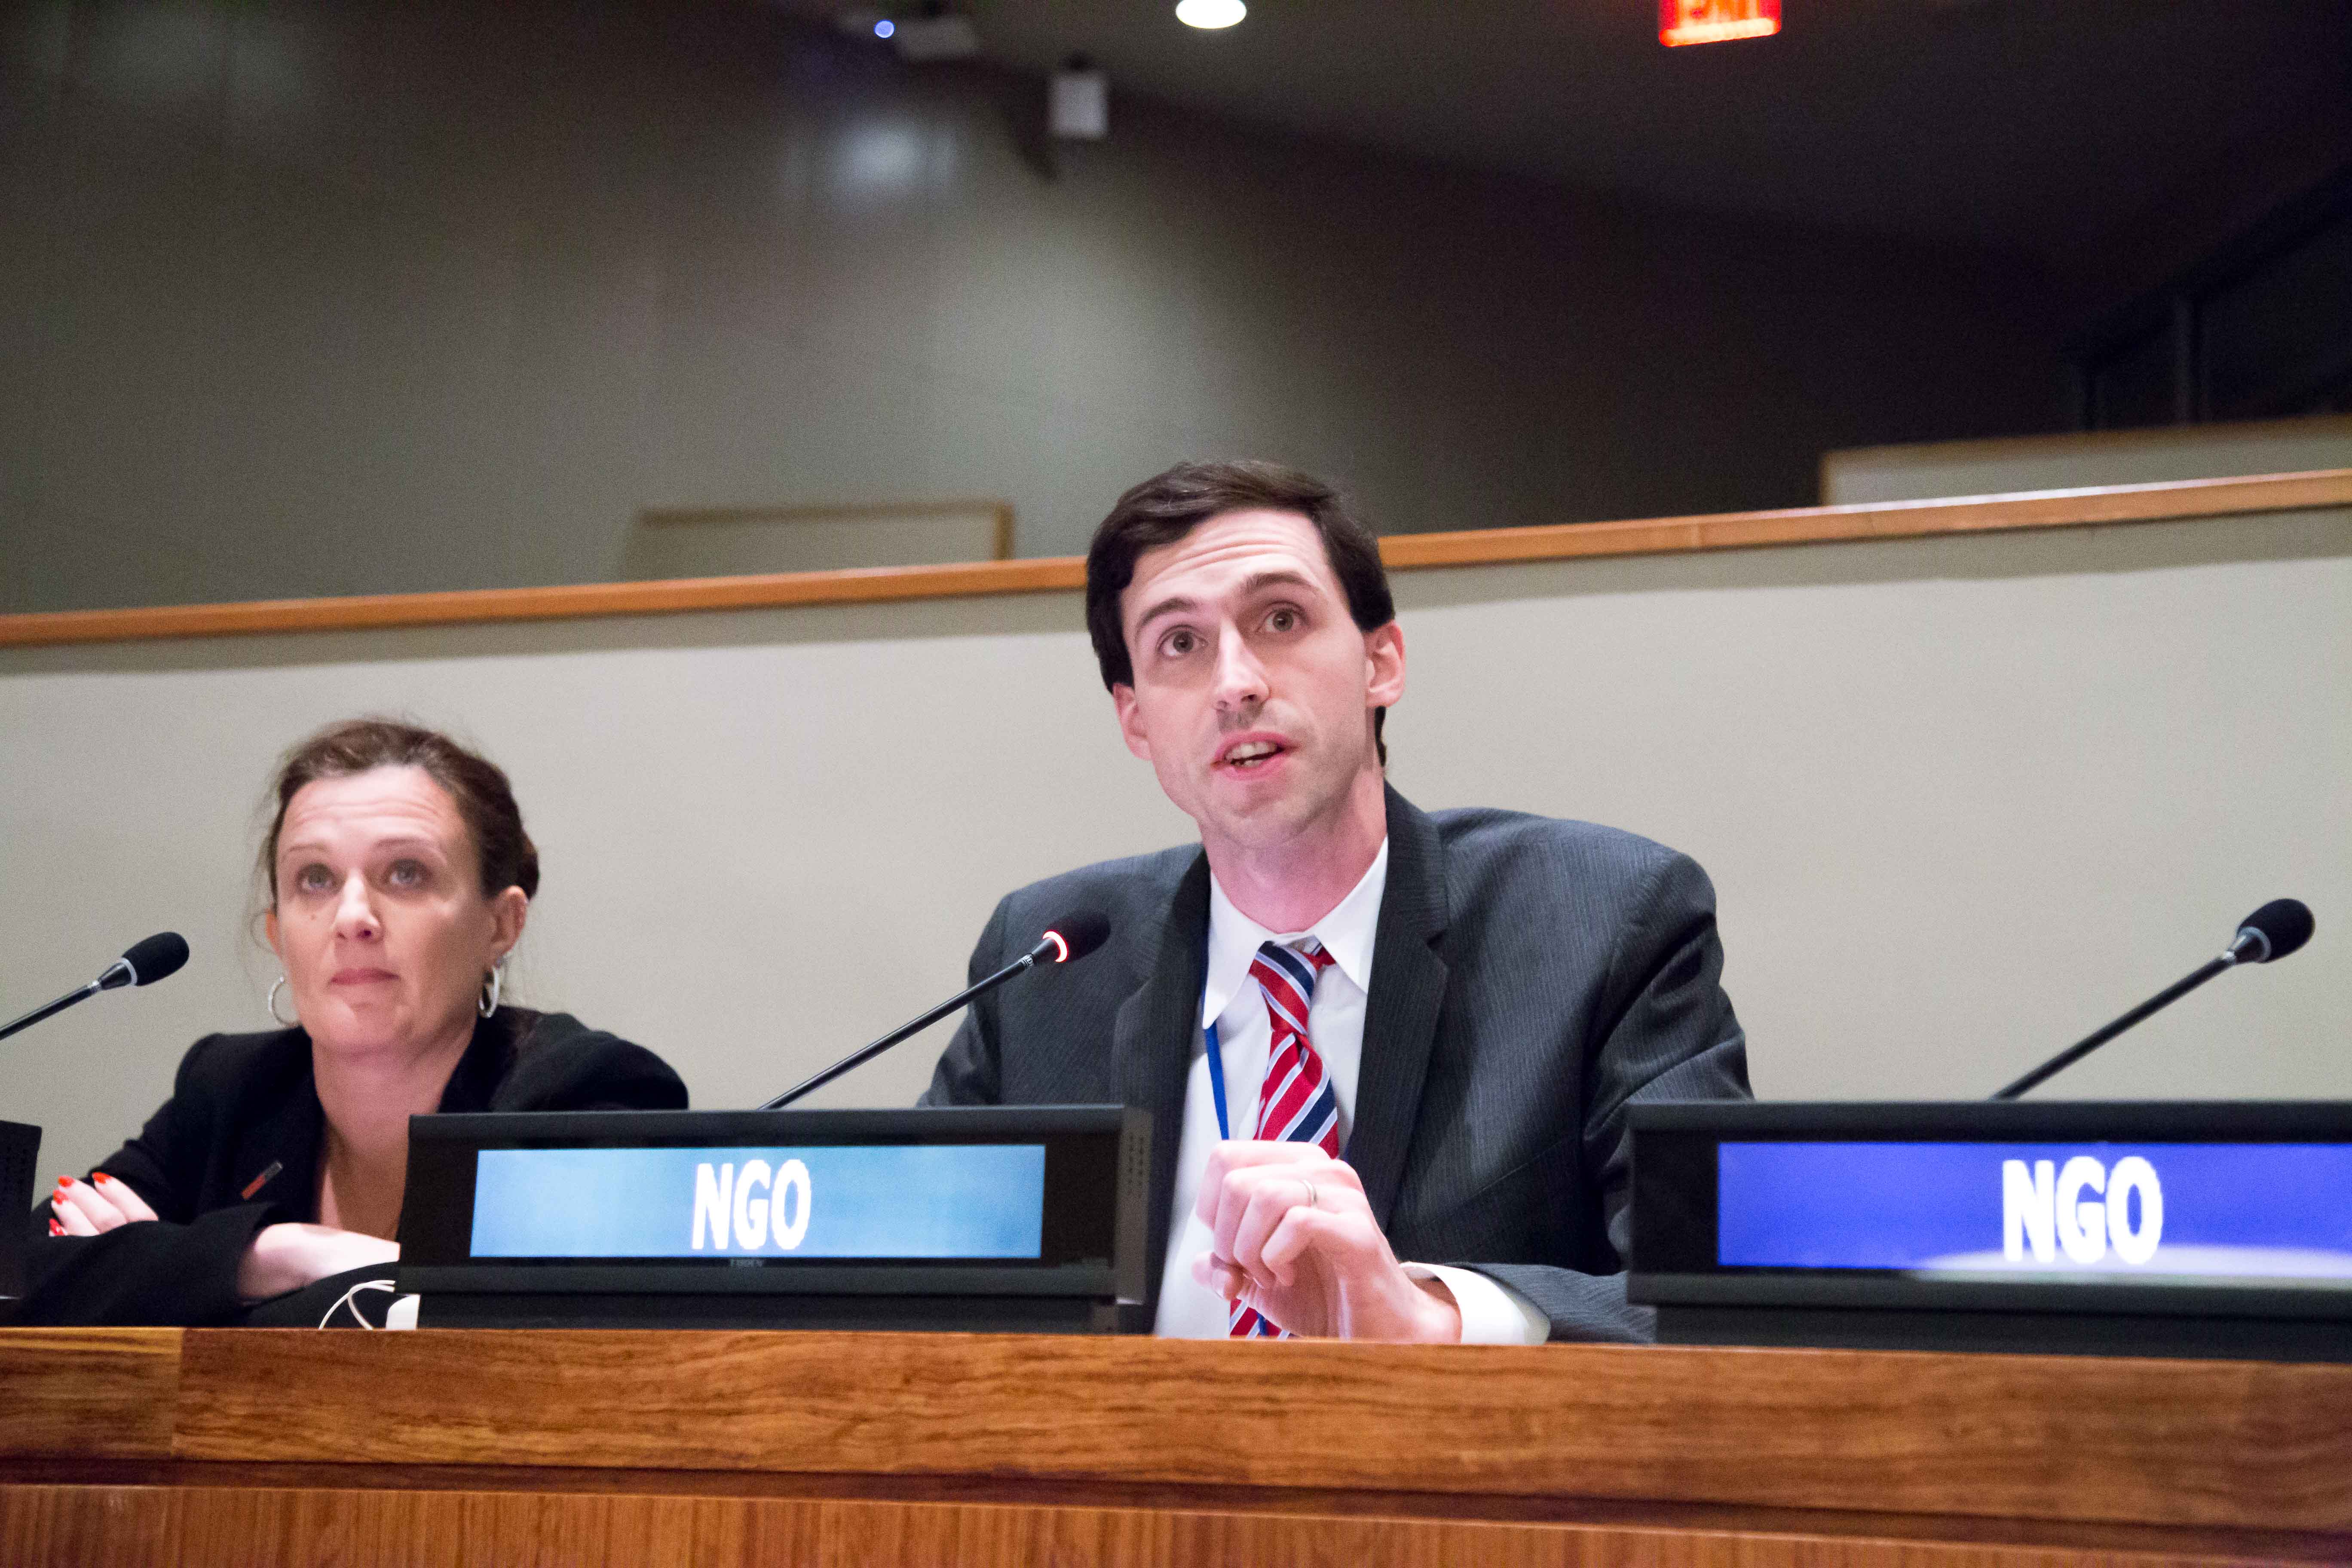 Dr. Matthew Bolton, Assistant Professor of Political Science and Model UN advisor at Pace University New York City, calls on the UN General Assembly First Committee to include greater civil society participation in disarmament processes.